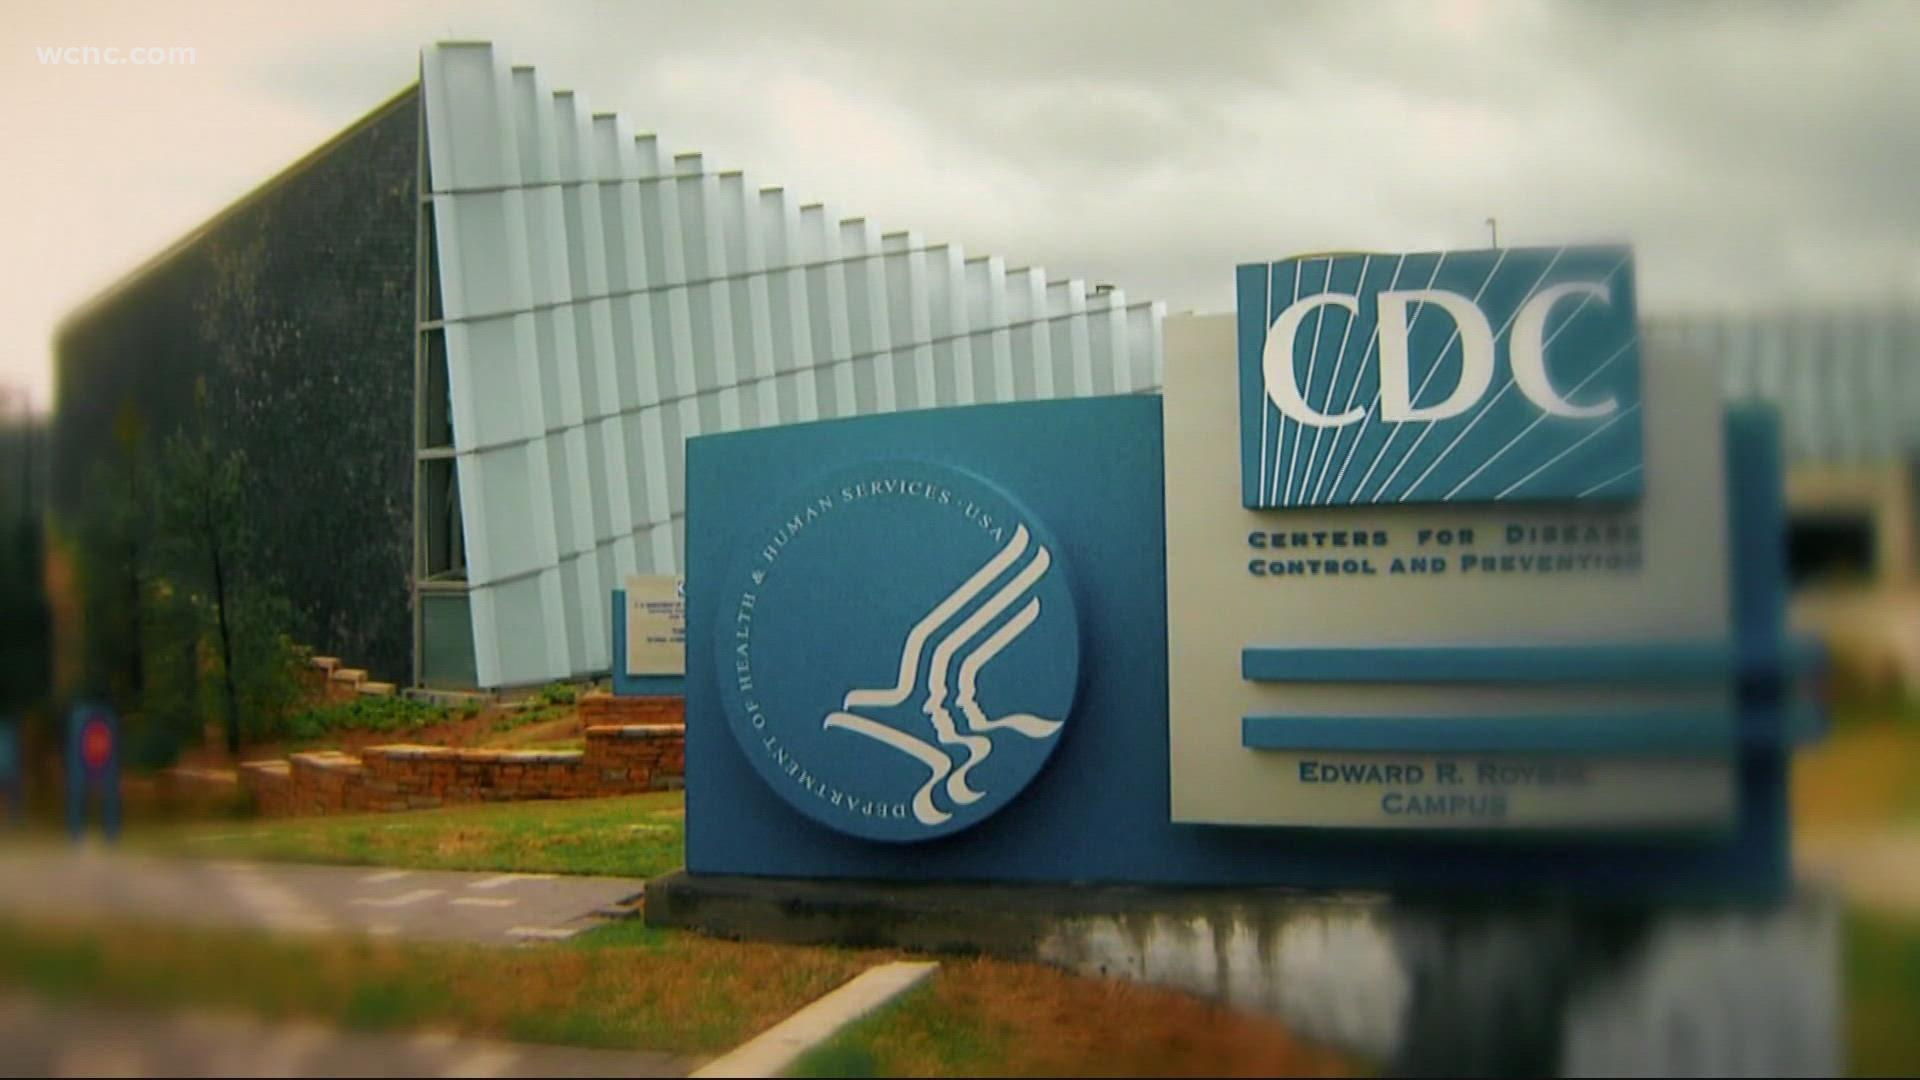 Chloe Leshner works to clear up guidance from the CDC